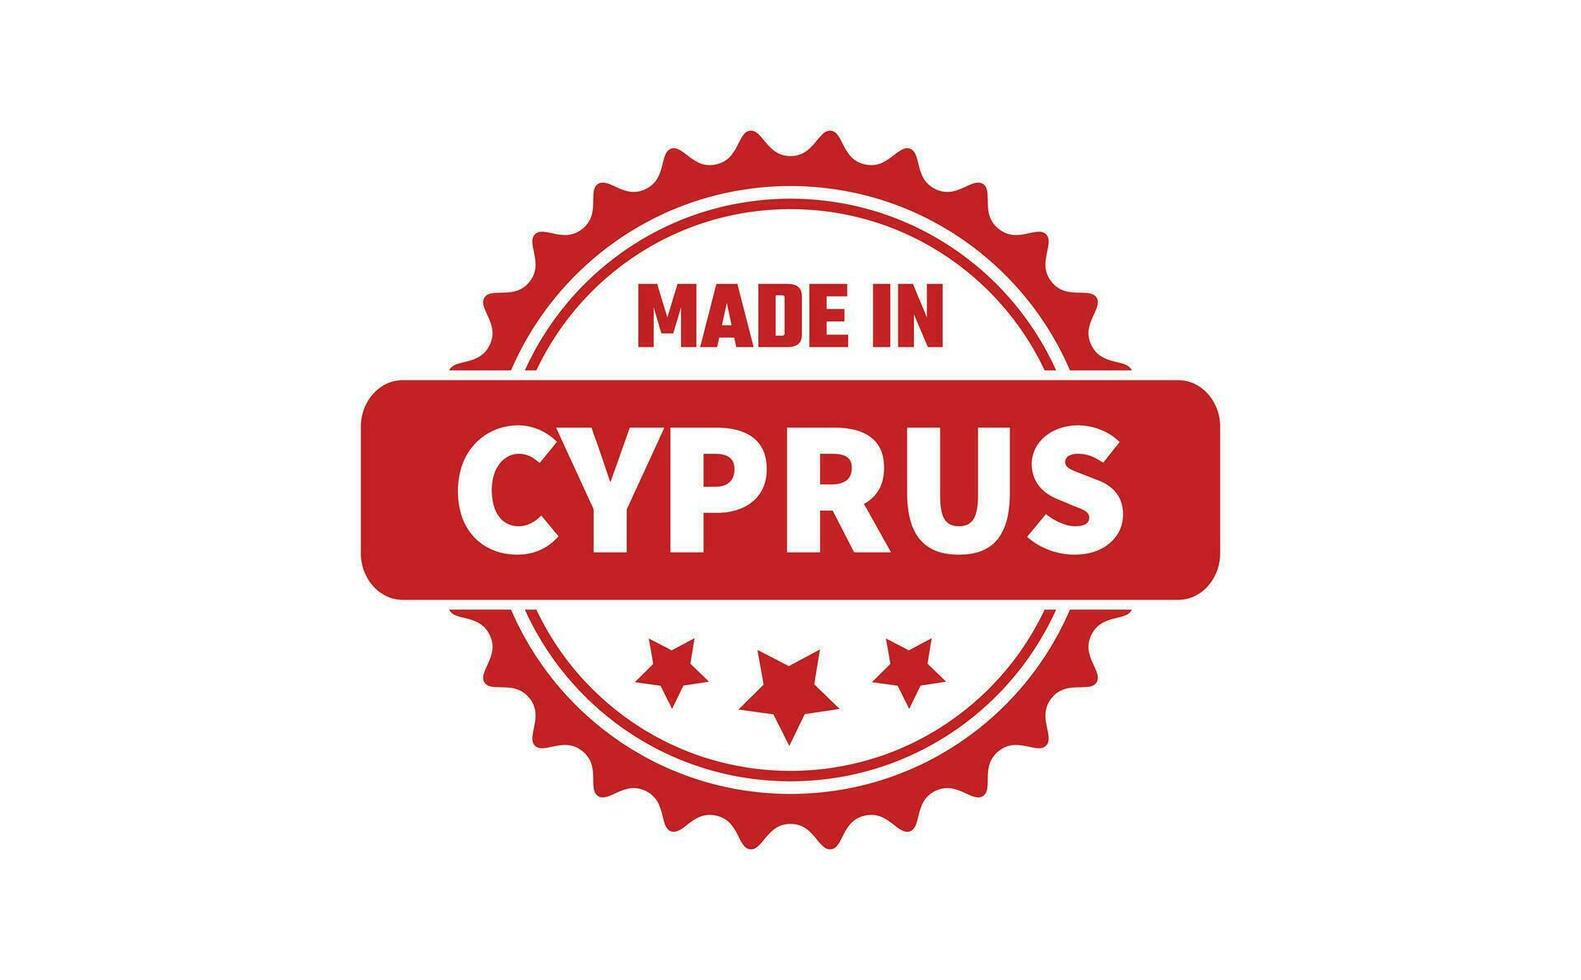 Made In Cyprus Rubber Stamp vector